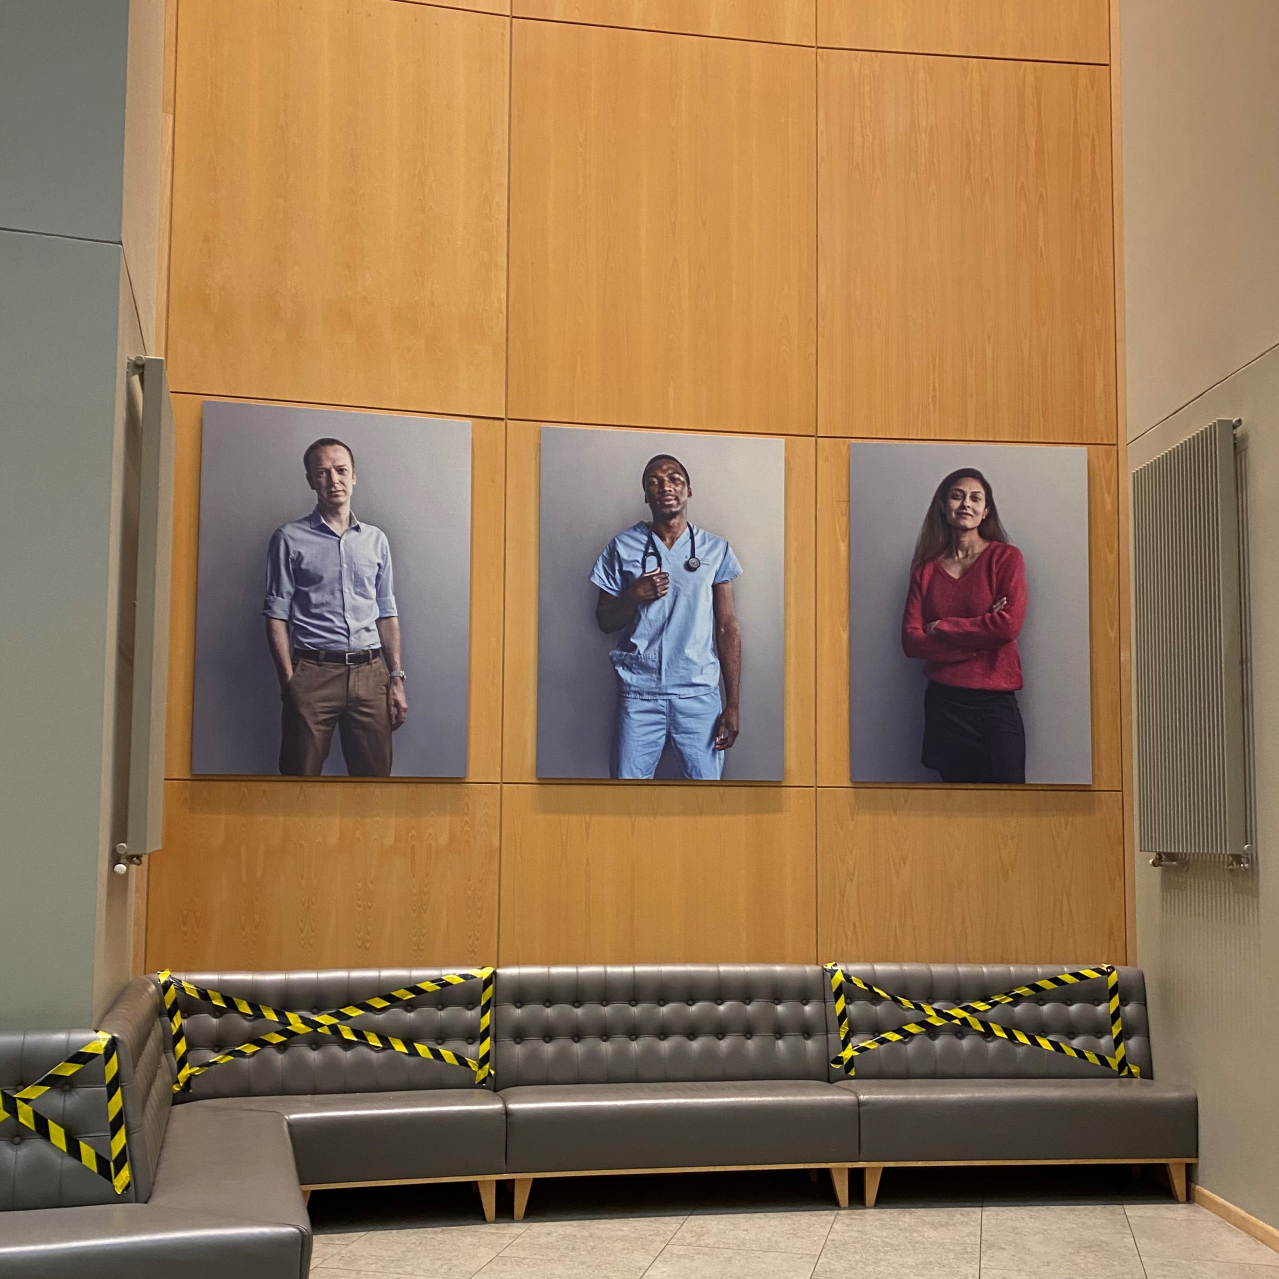 New portraits hanging in the foyer of the Chancellor's Building